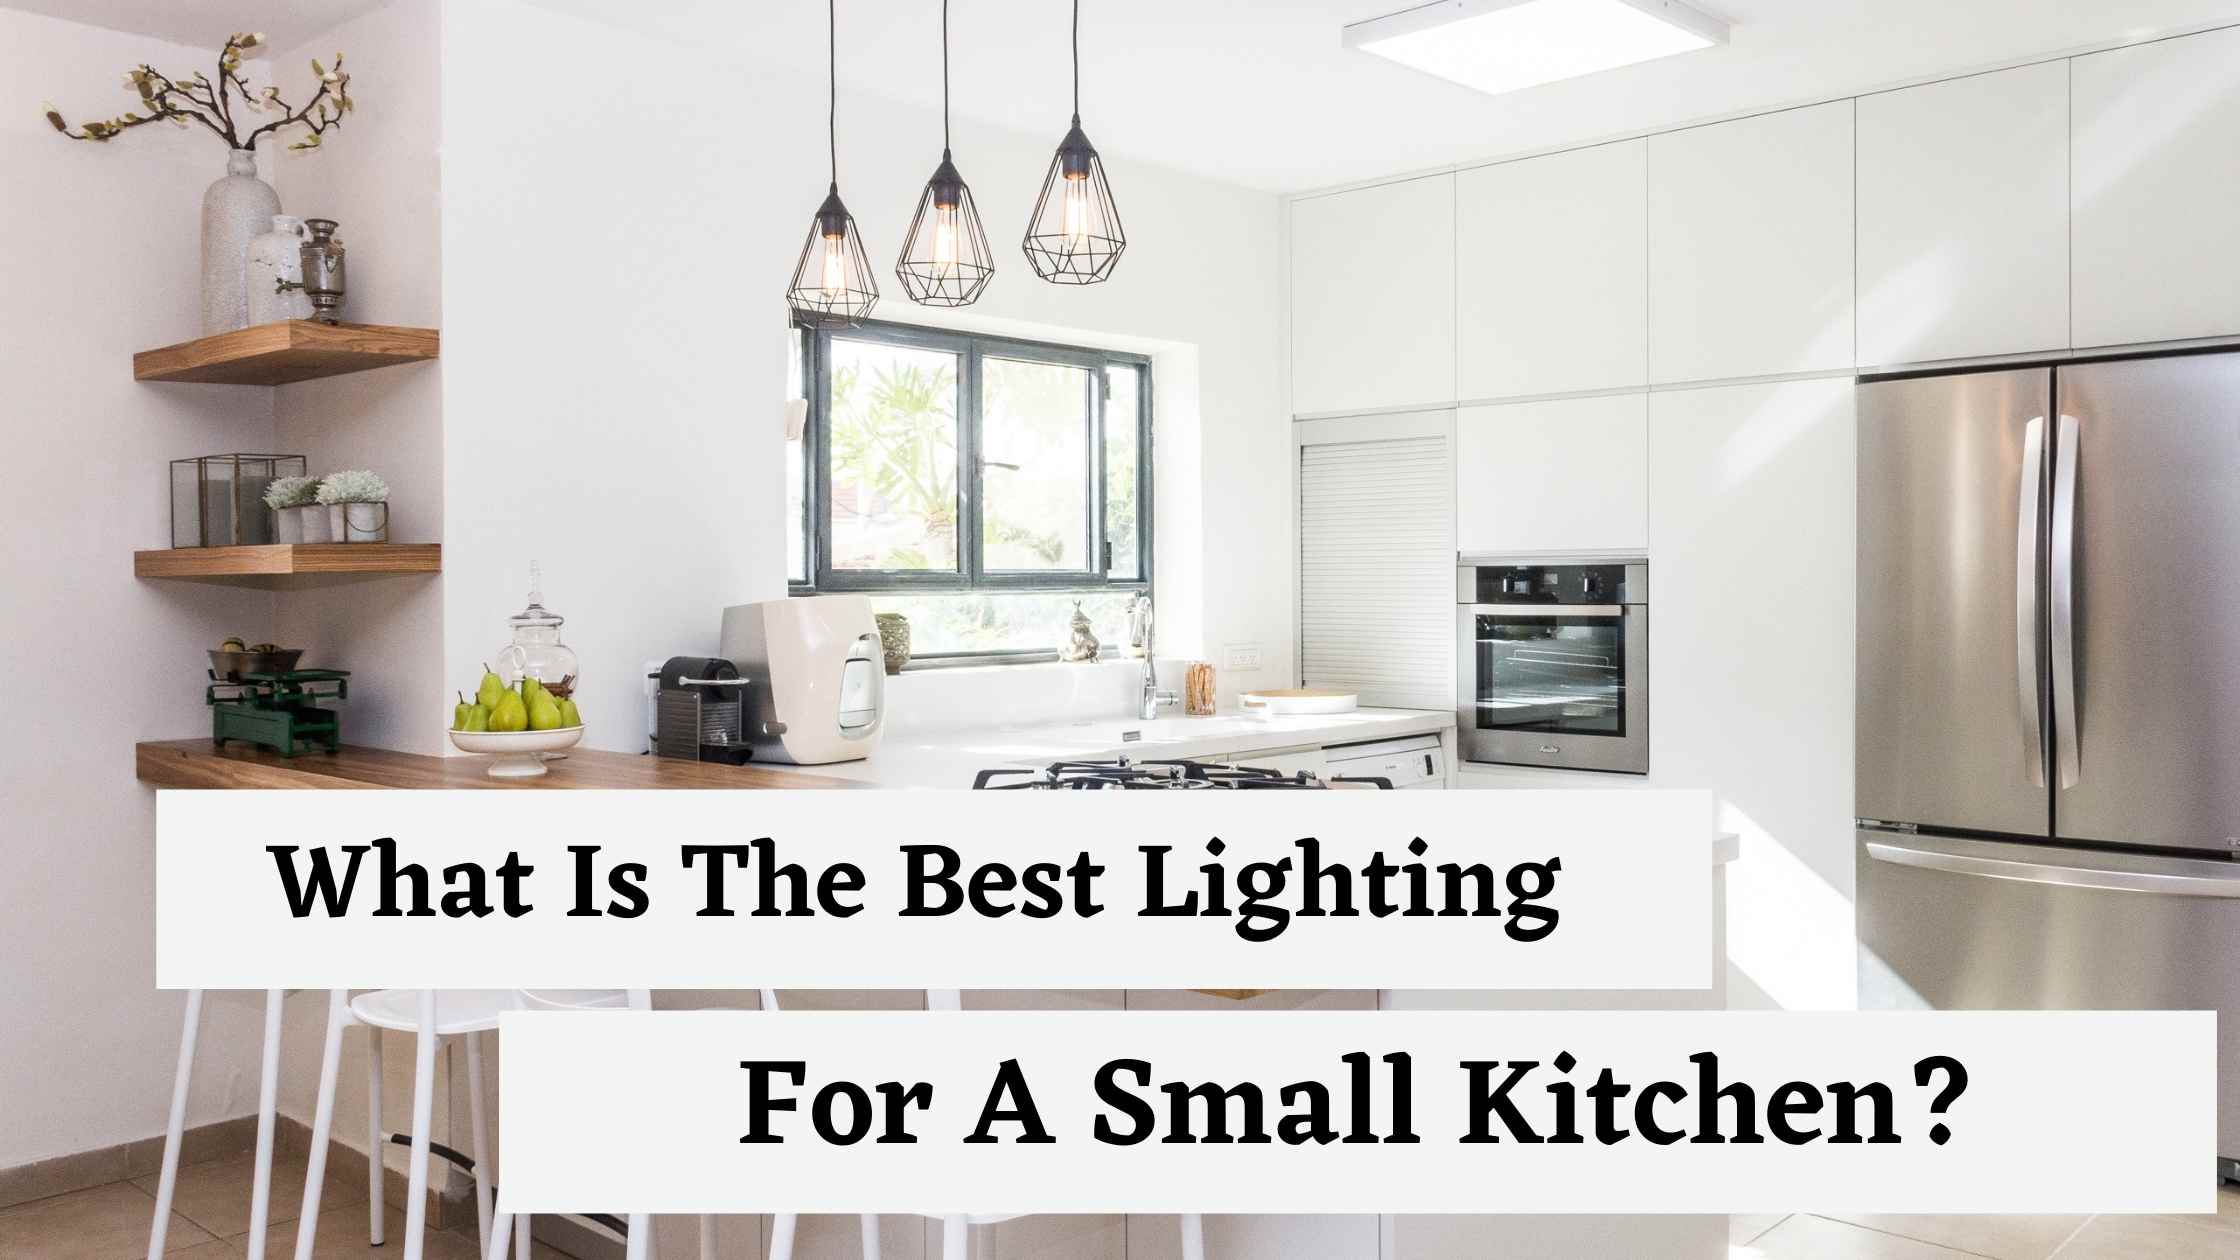 What Is The Best Lighting For A Small Kitchen?